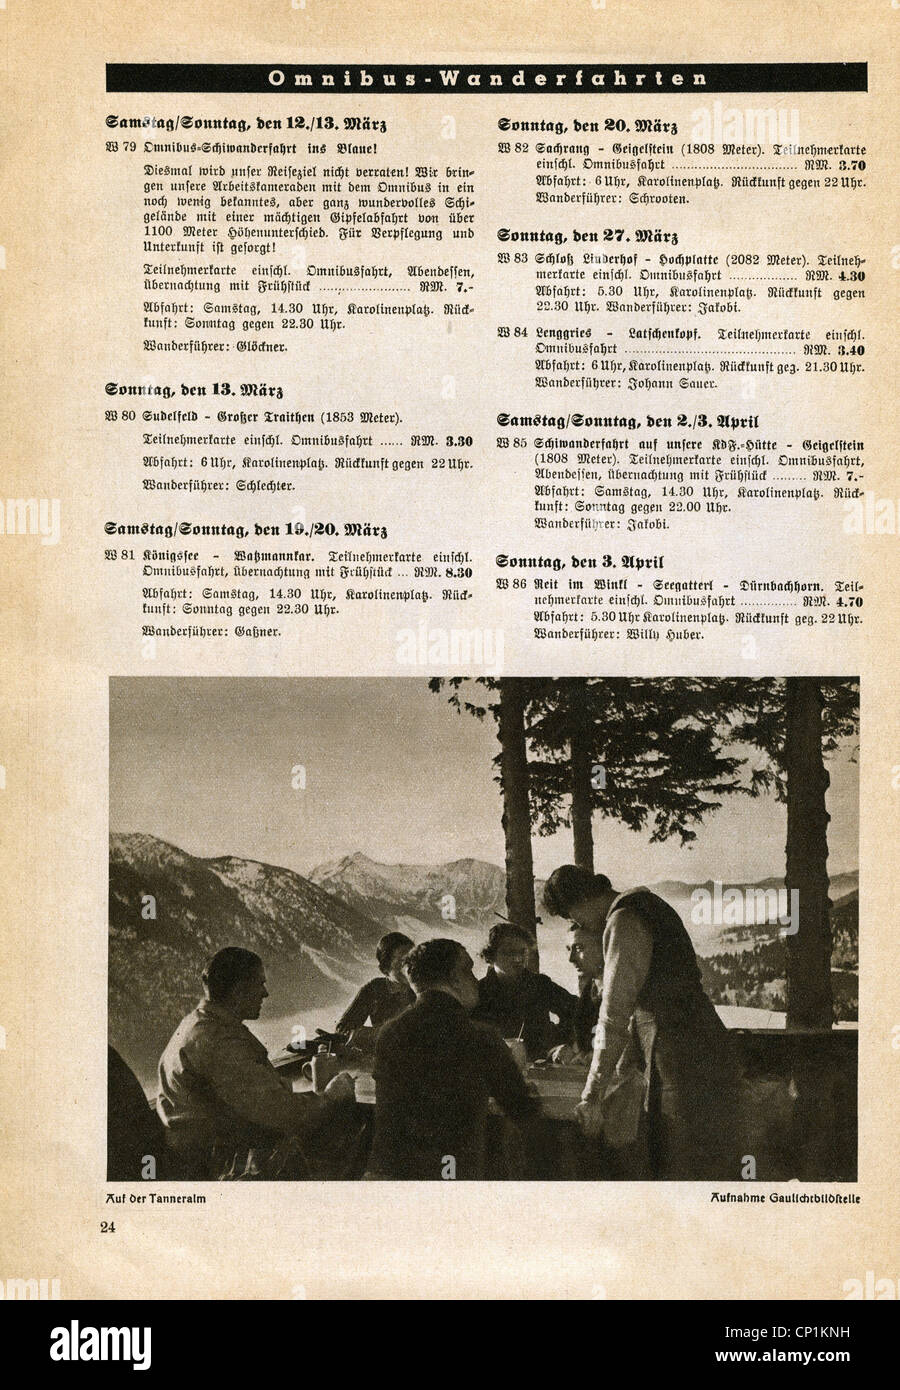 Nazism / National Socialism, organisations, 'Kraft durch Freude' ('Strength through Joy', KdF), journeys, advert, hiking rides, magazine of Gau Munich Upper Bavaria, March 1938, Additional-Rights-Clearences-Not Available Stock Photo